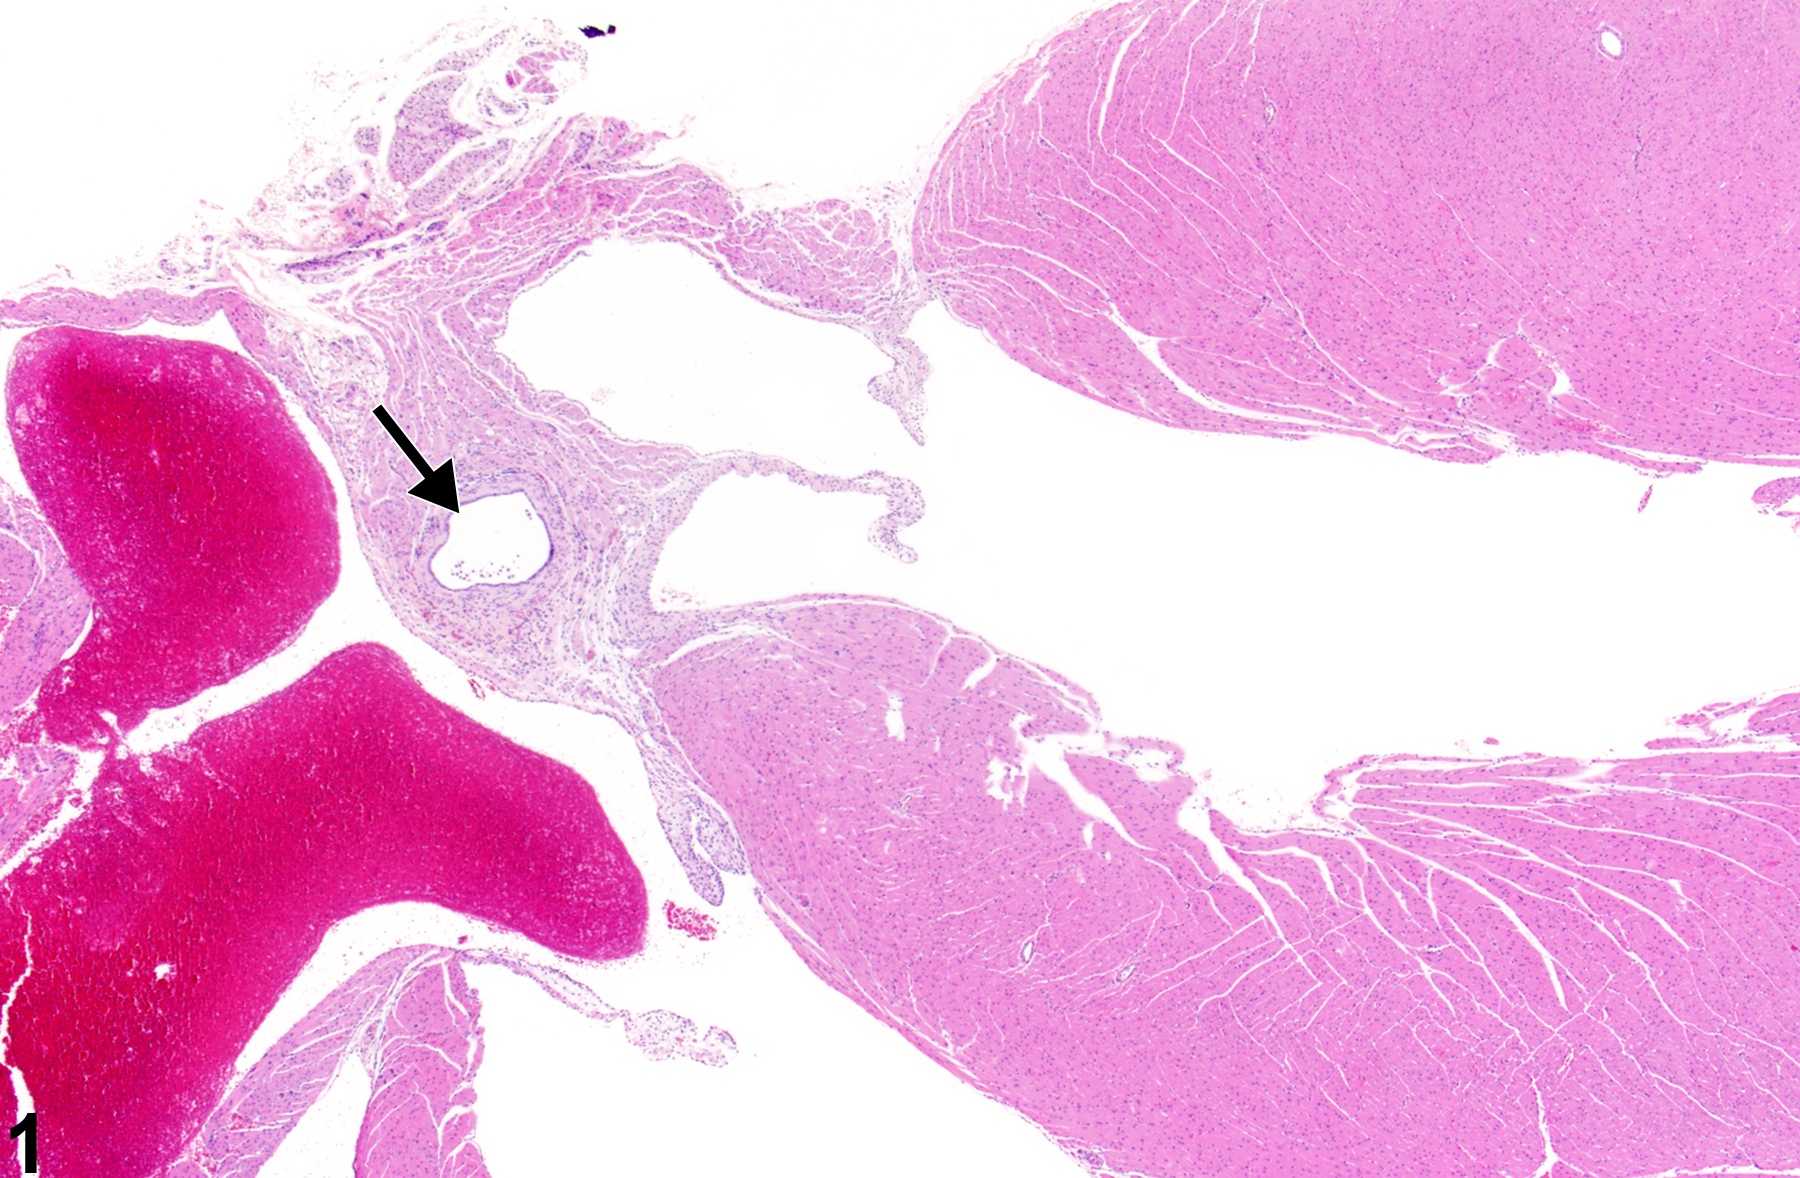 Image of cyst in the heart from a male BALB/c mouse in a subchronic study